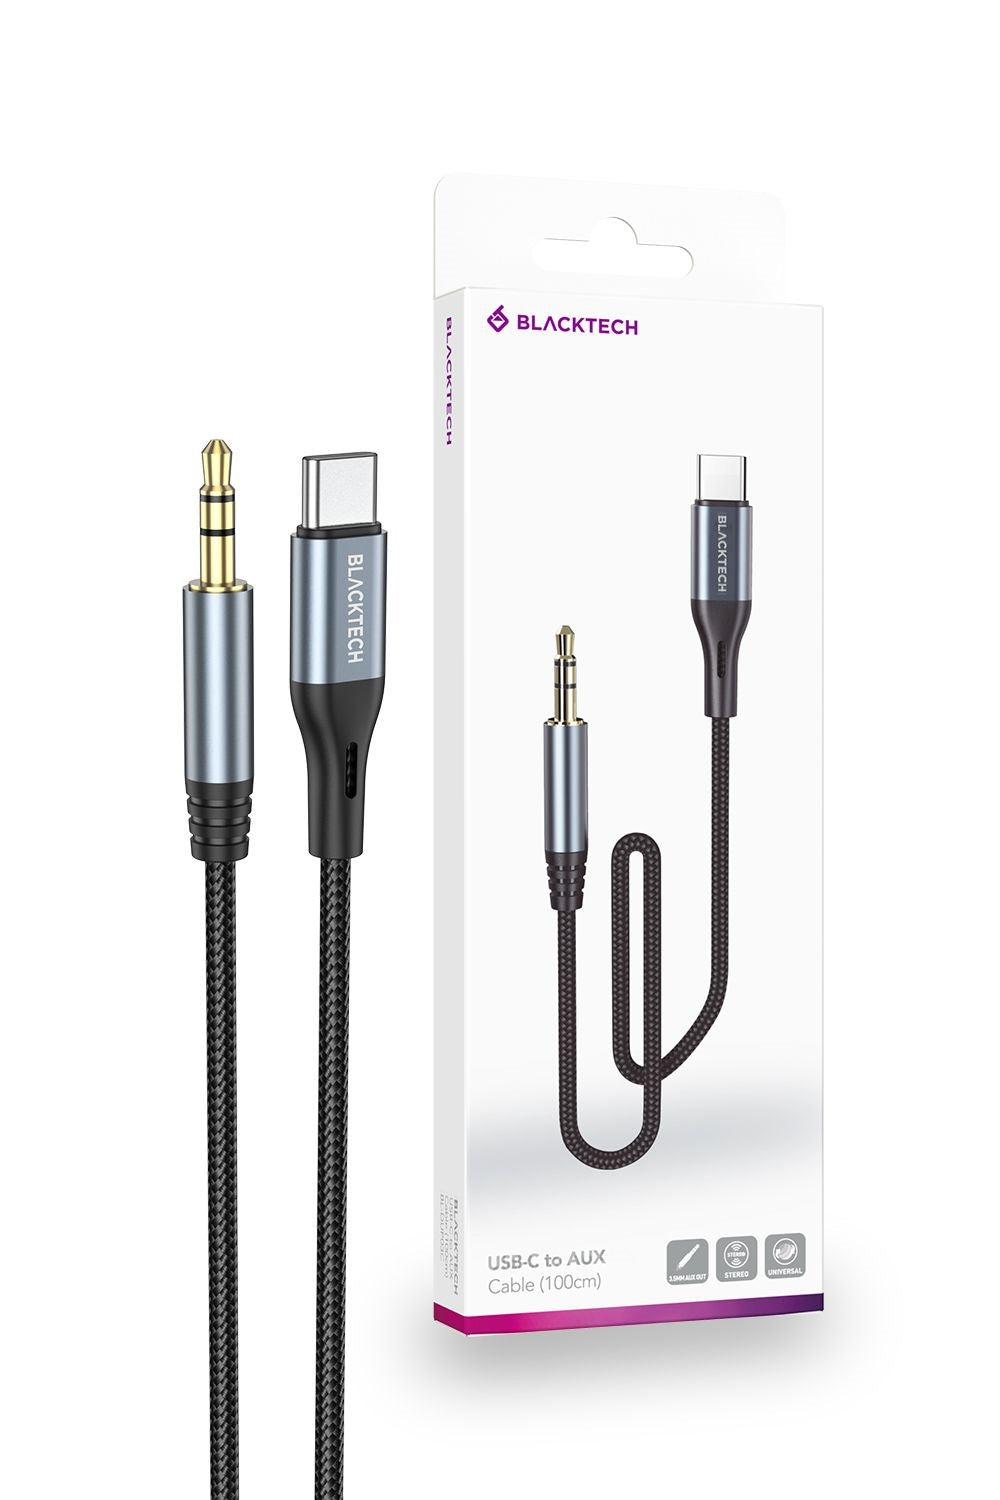 Blacktech USB-C Type-C to 3.5mm AUX Nylon Braided Cable - 1 metre